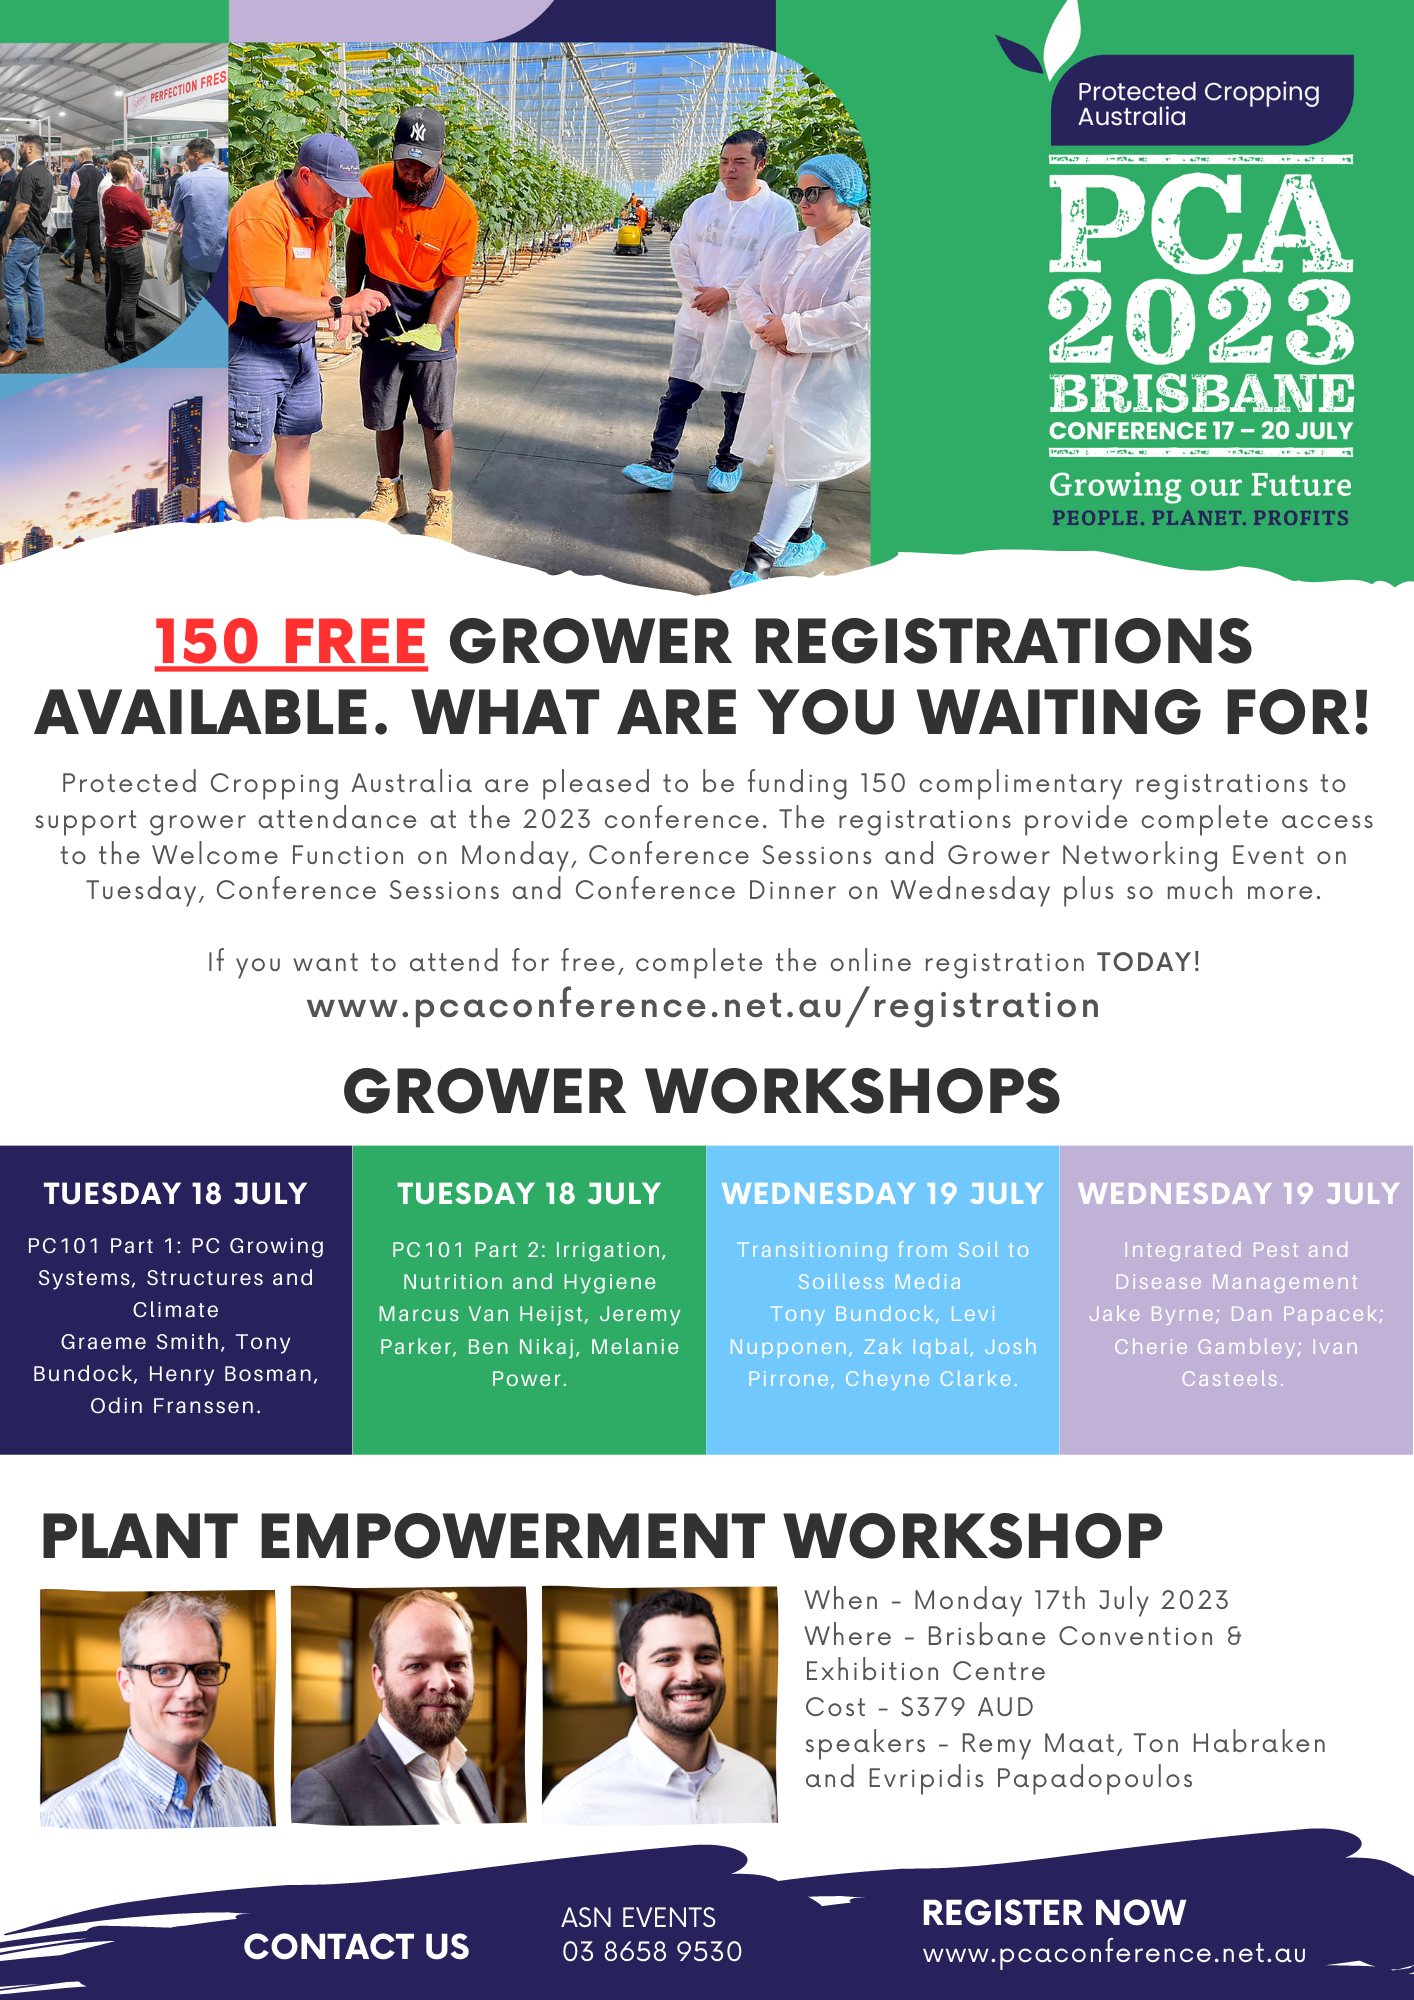 Protected Cropping Austalia – Brisbane Conference and Exhibition